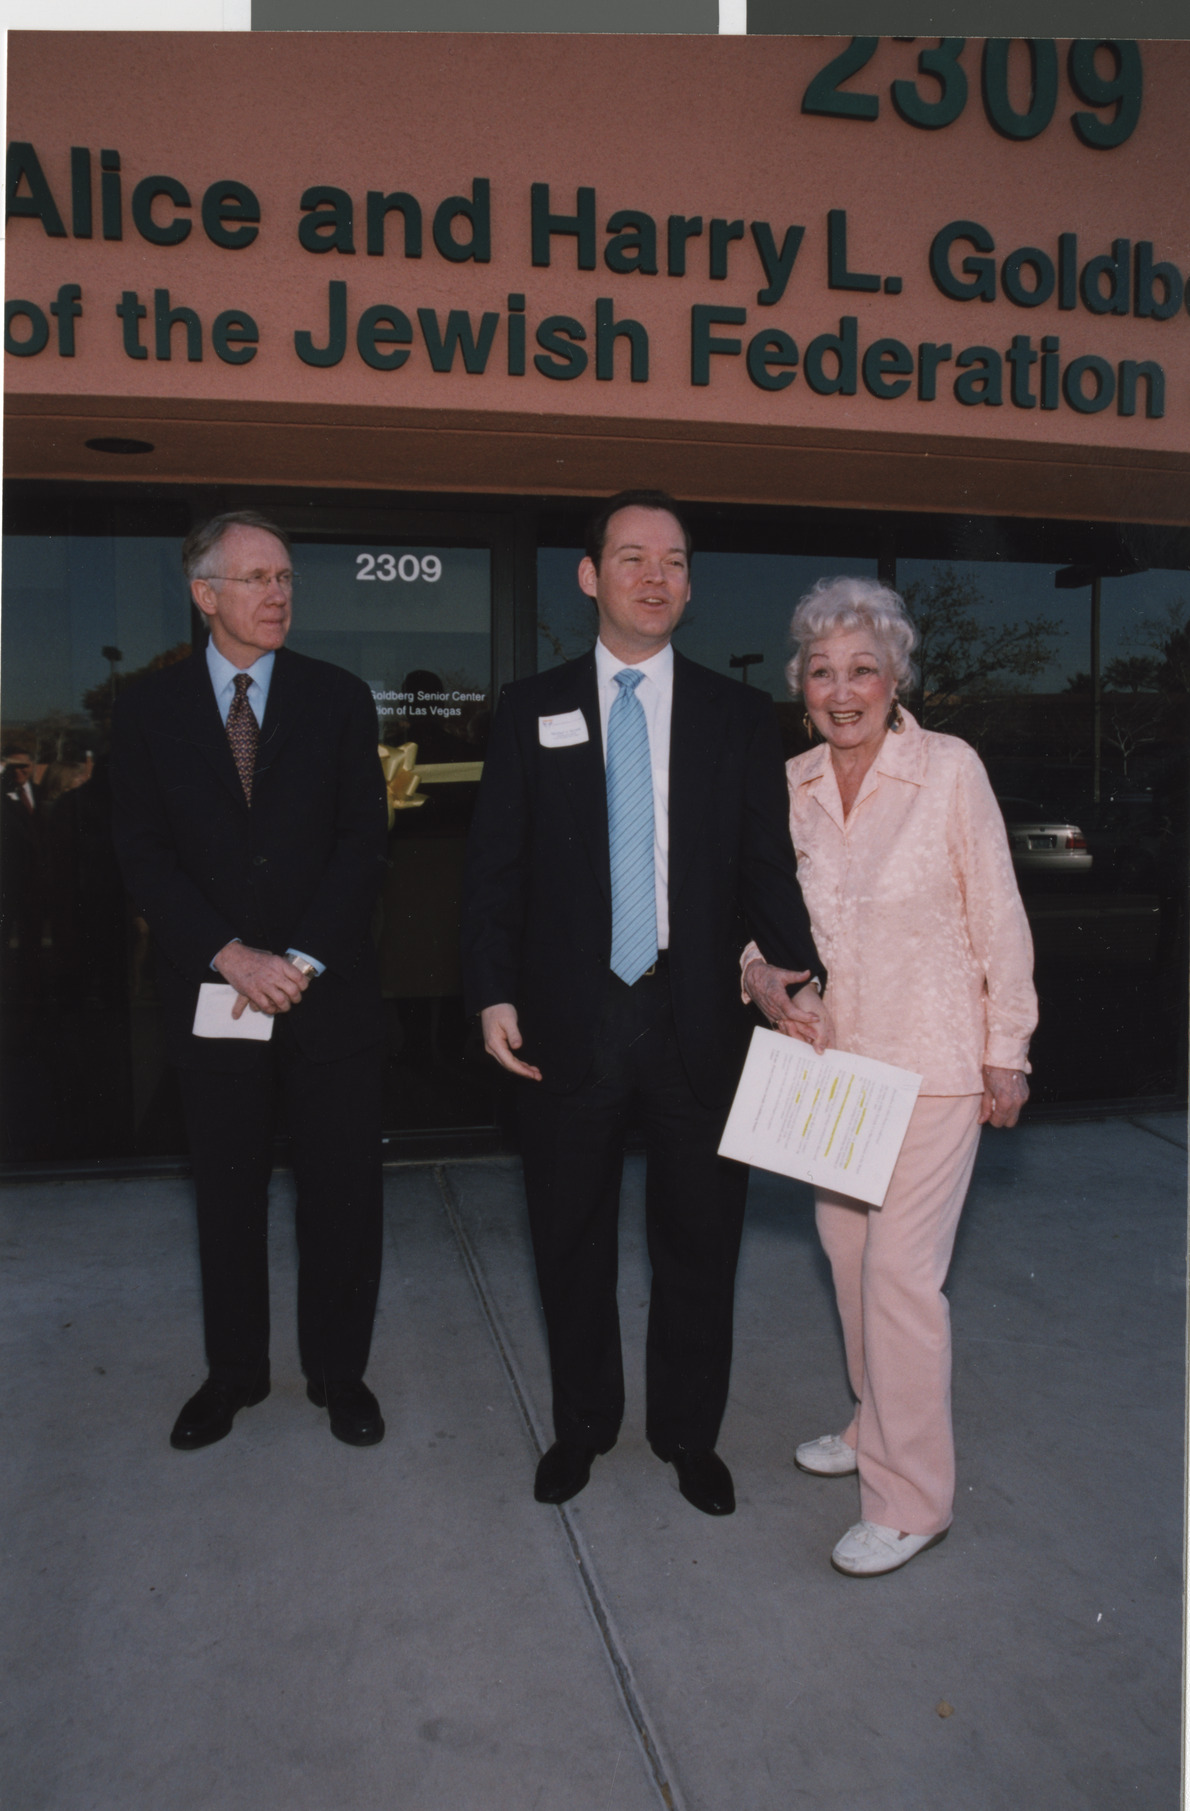 Photograph of Michael Novick with Senator Harry Reid and unidentified woman outside the Alice and Harry L. Goldberg Senior Center